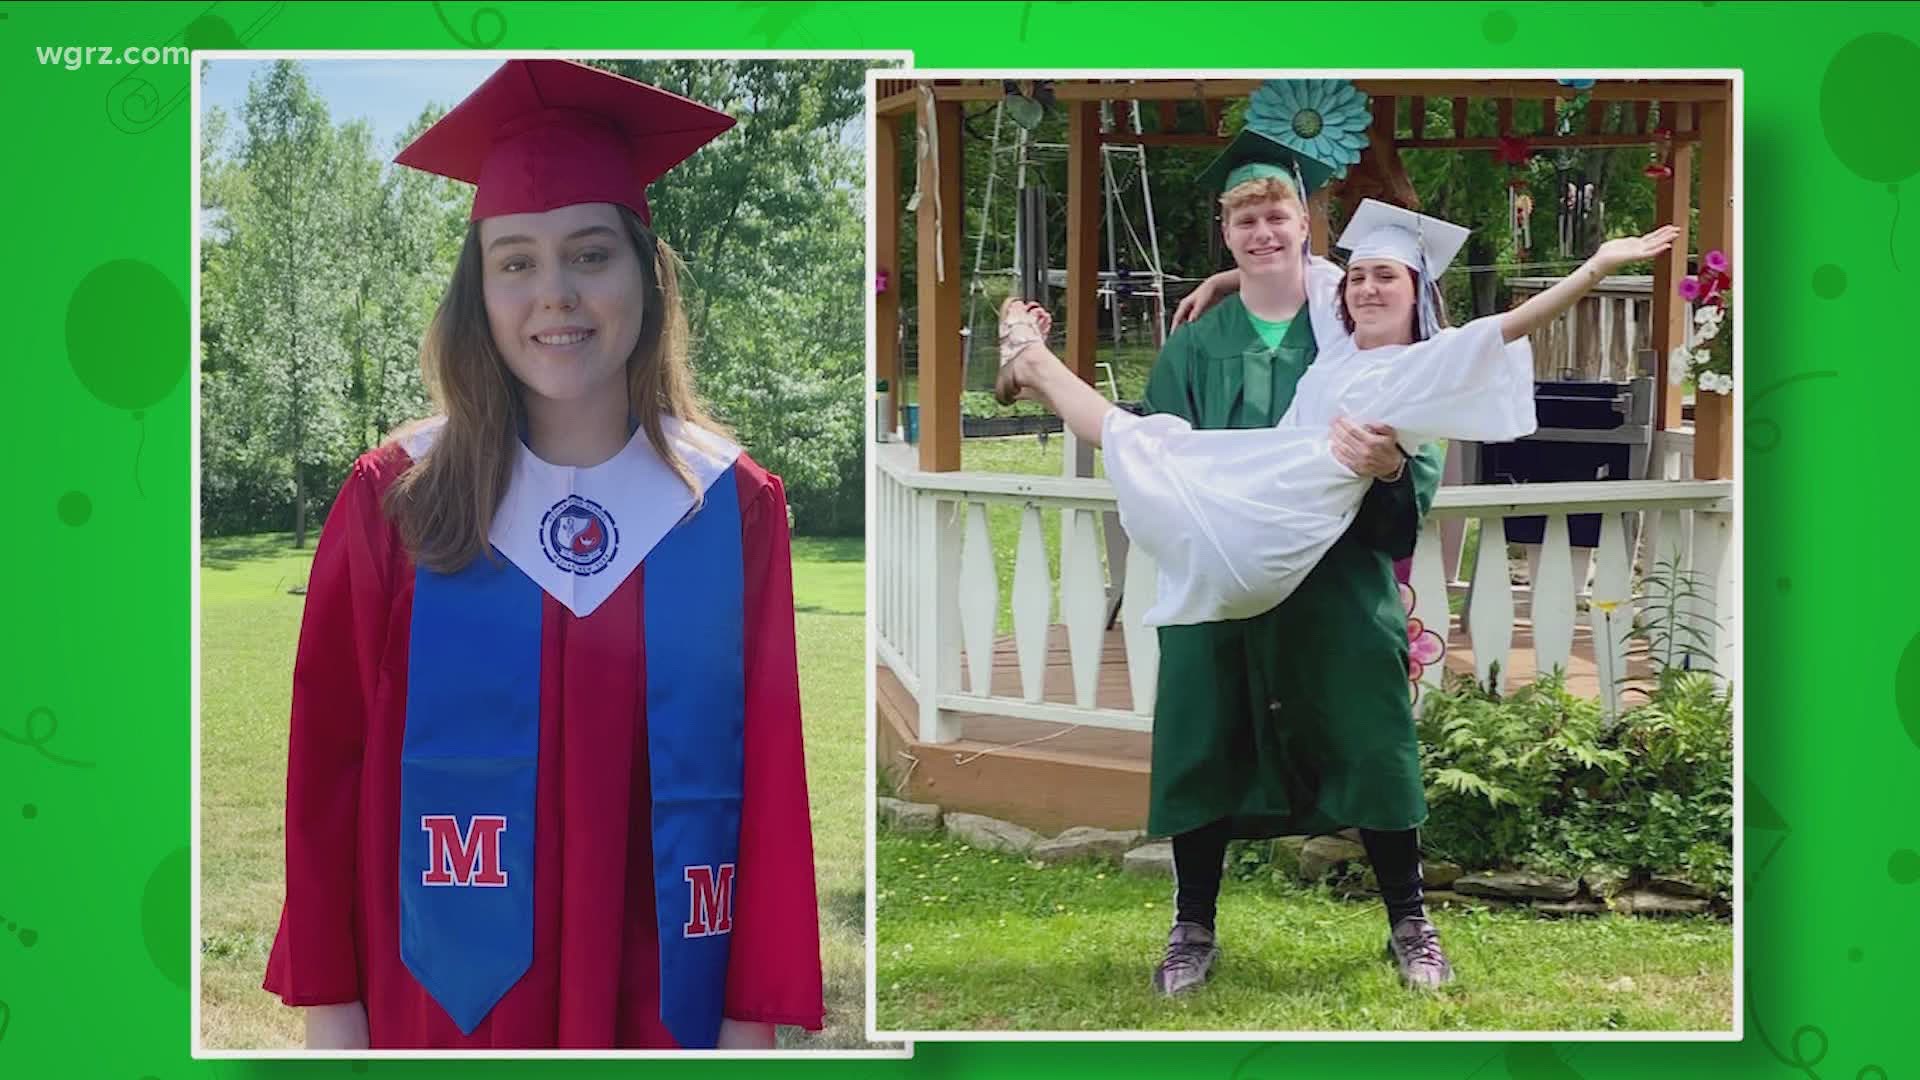 Most Buffalo is celebrating the class of 2020 by sharing photos you sent in of your graduates.